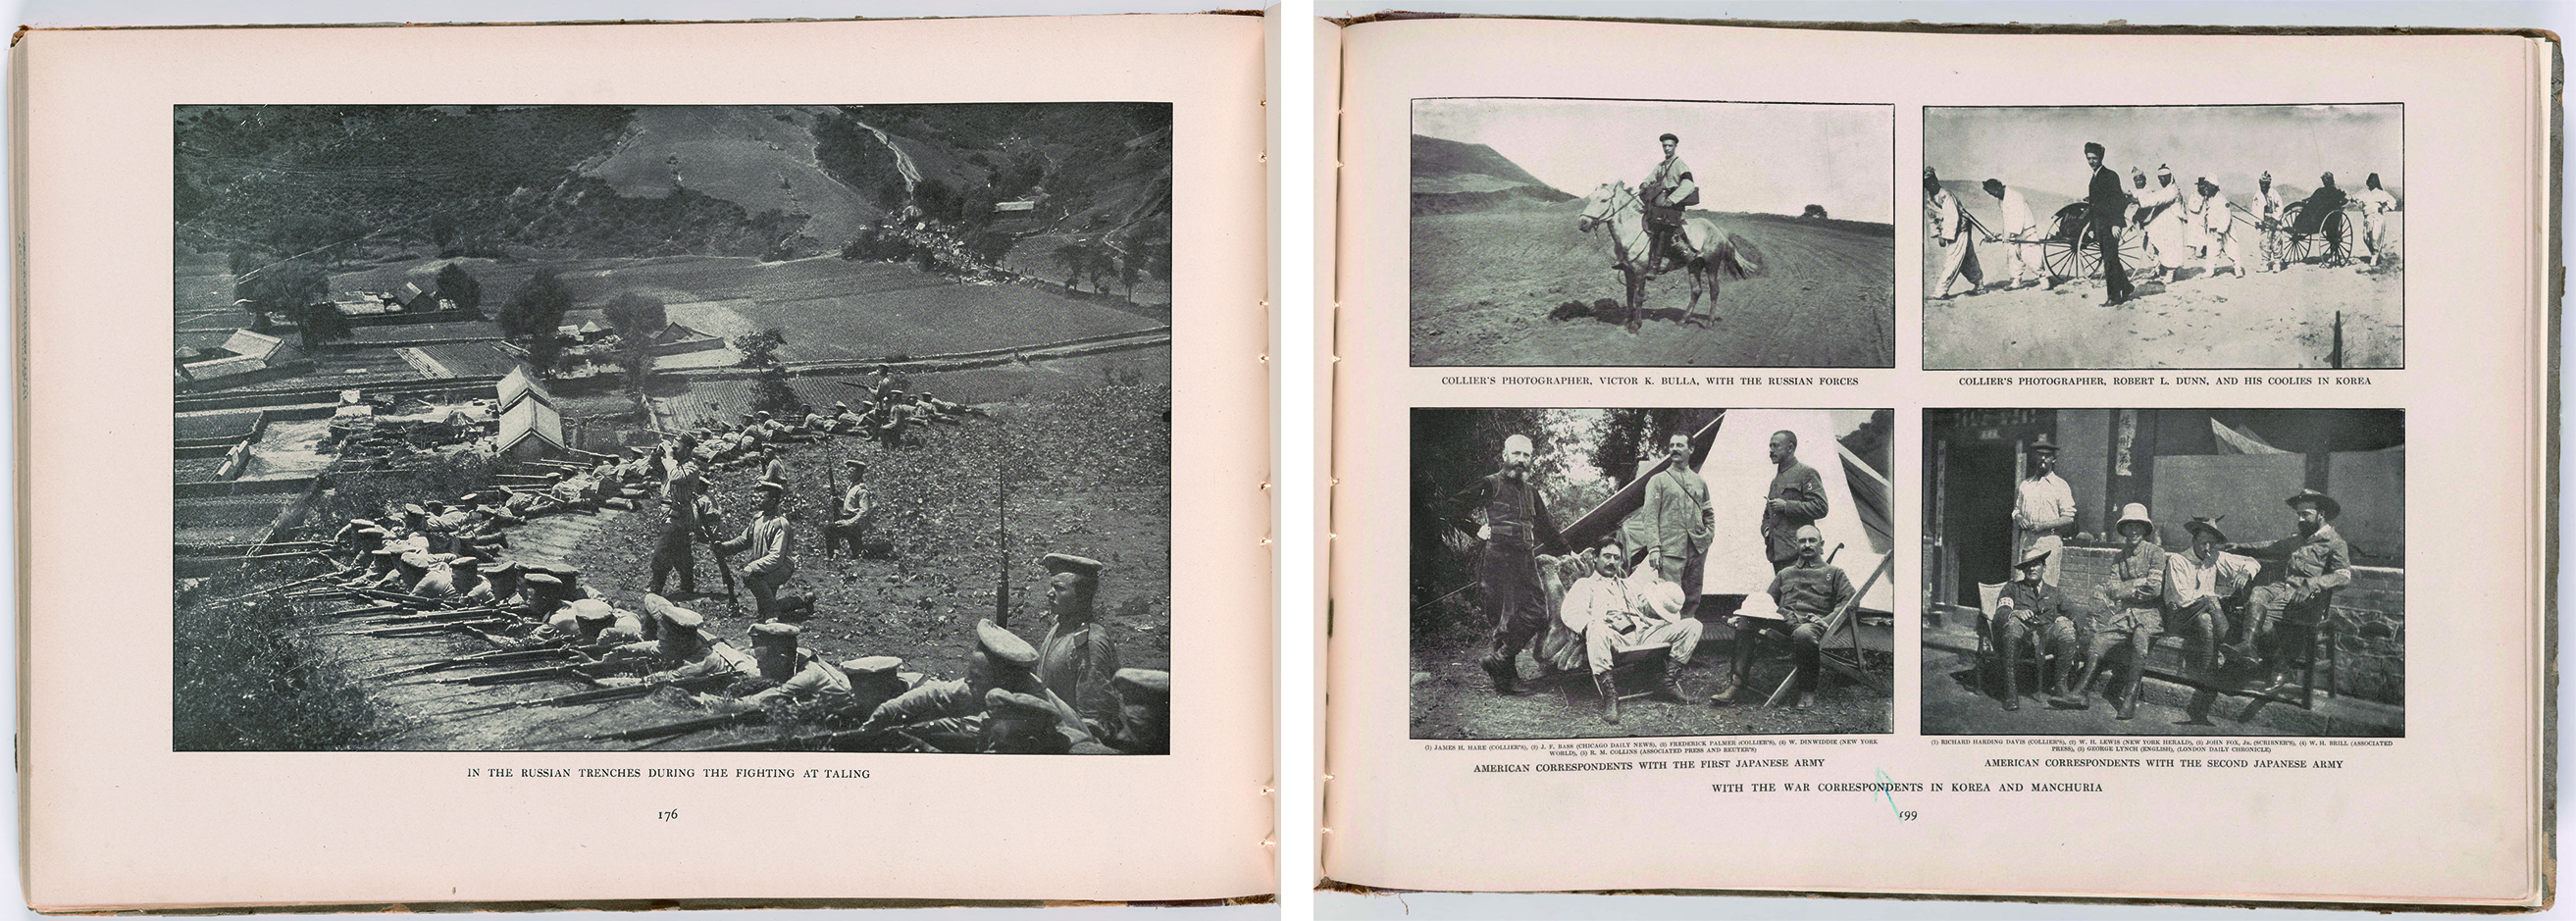 Interior pages from A Photographic Record of the Russo-Japanese War